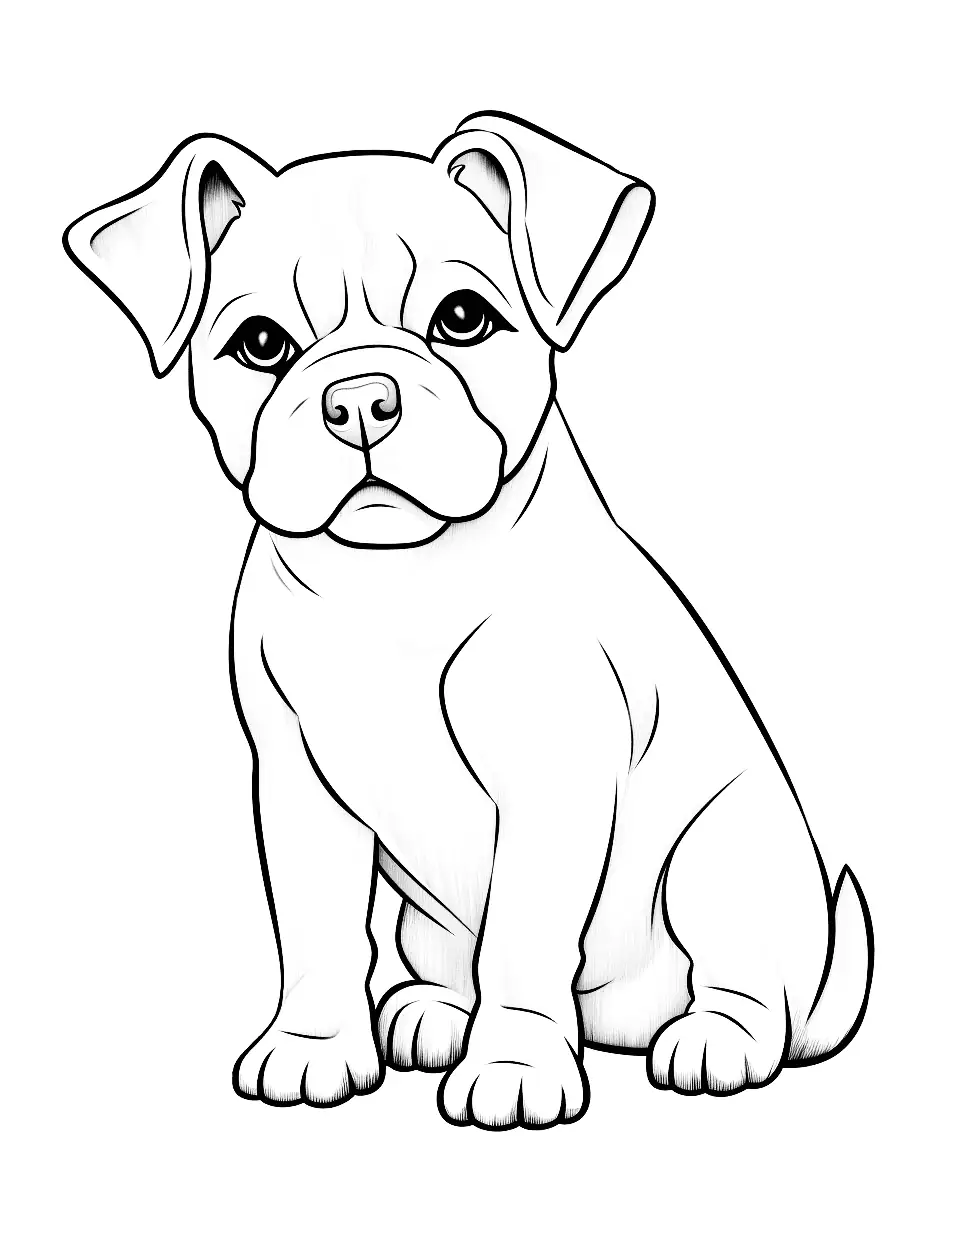 In the Spotlight Show Dog Bulldog Puppy Coloring Page - A Bulldog puppy in a show pose, perfect for a detailed coloring session.